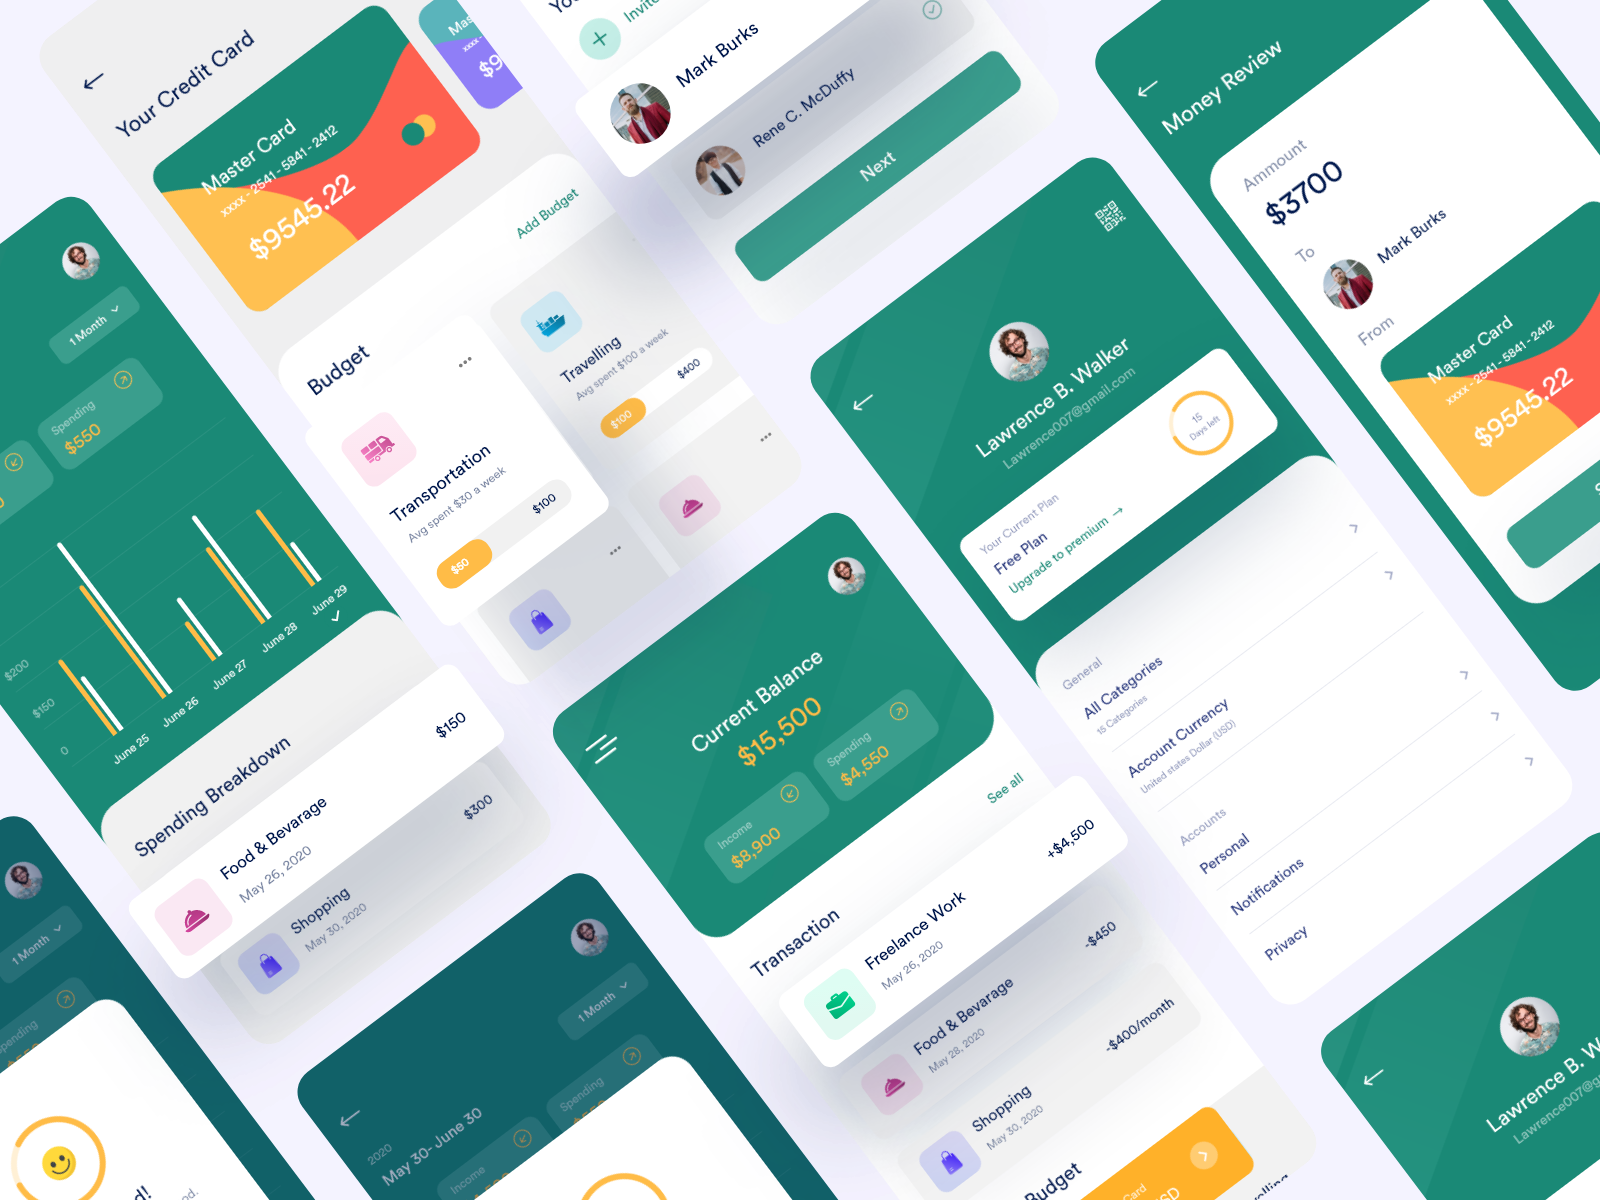 Financial Mobile Application Design by Dotpixel Agency on Dribbble